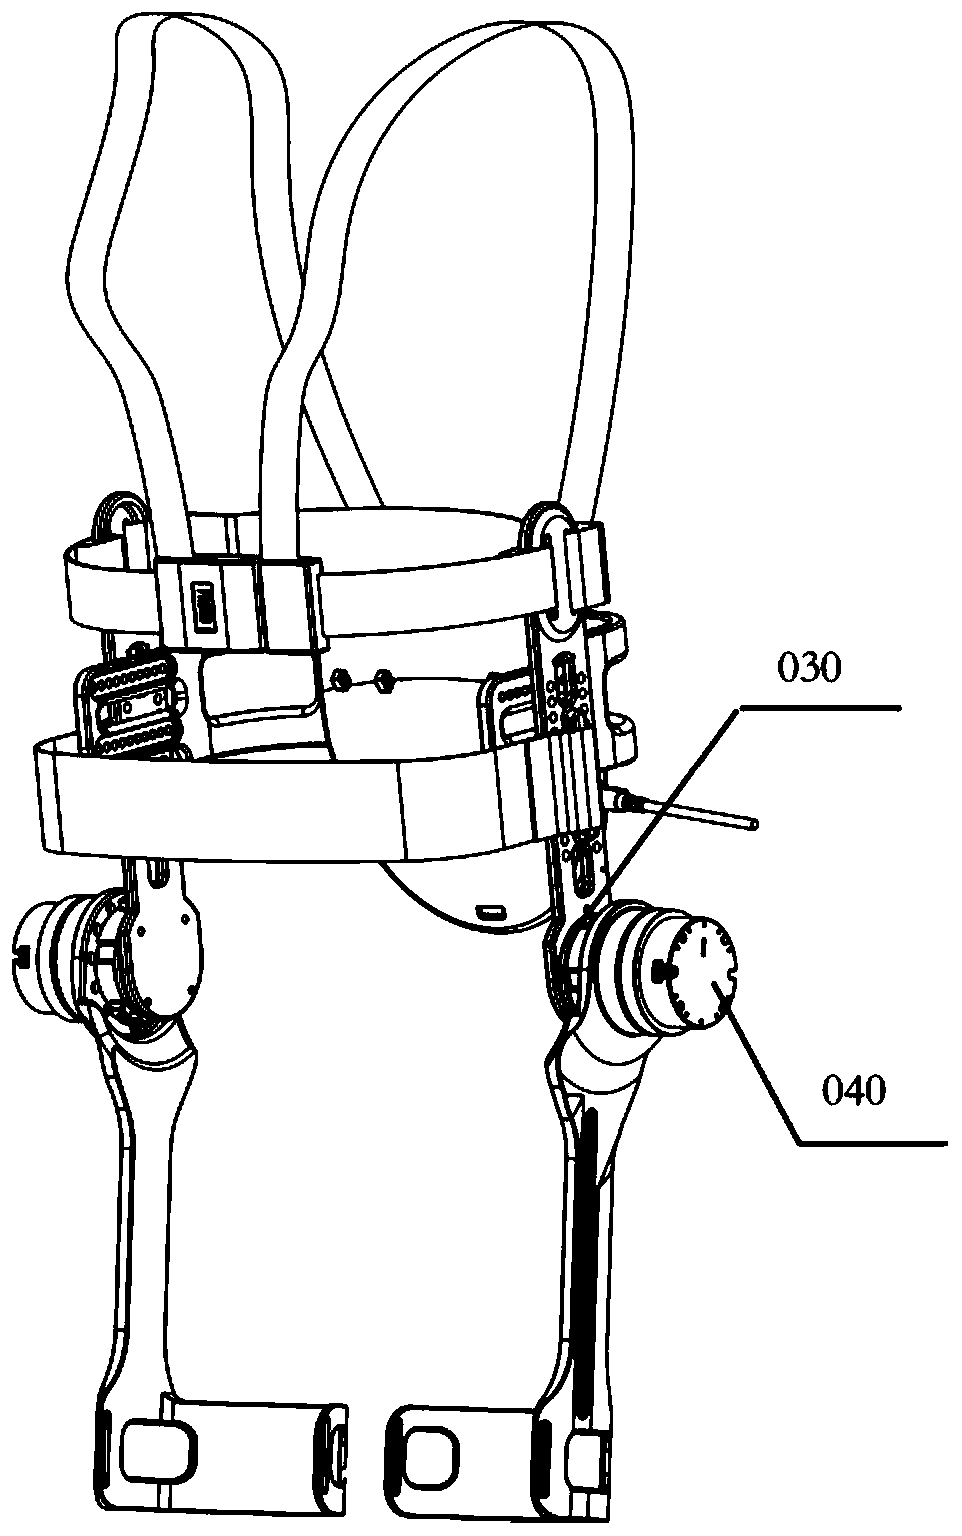 Lower limb exoskeleton robot with overload slipping function